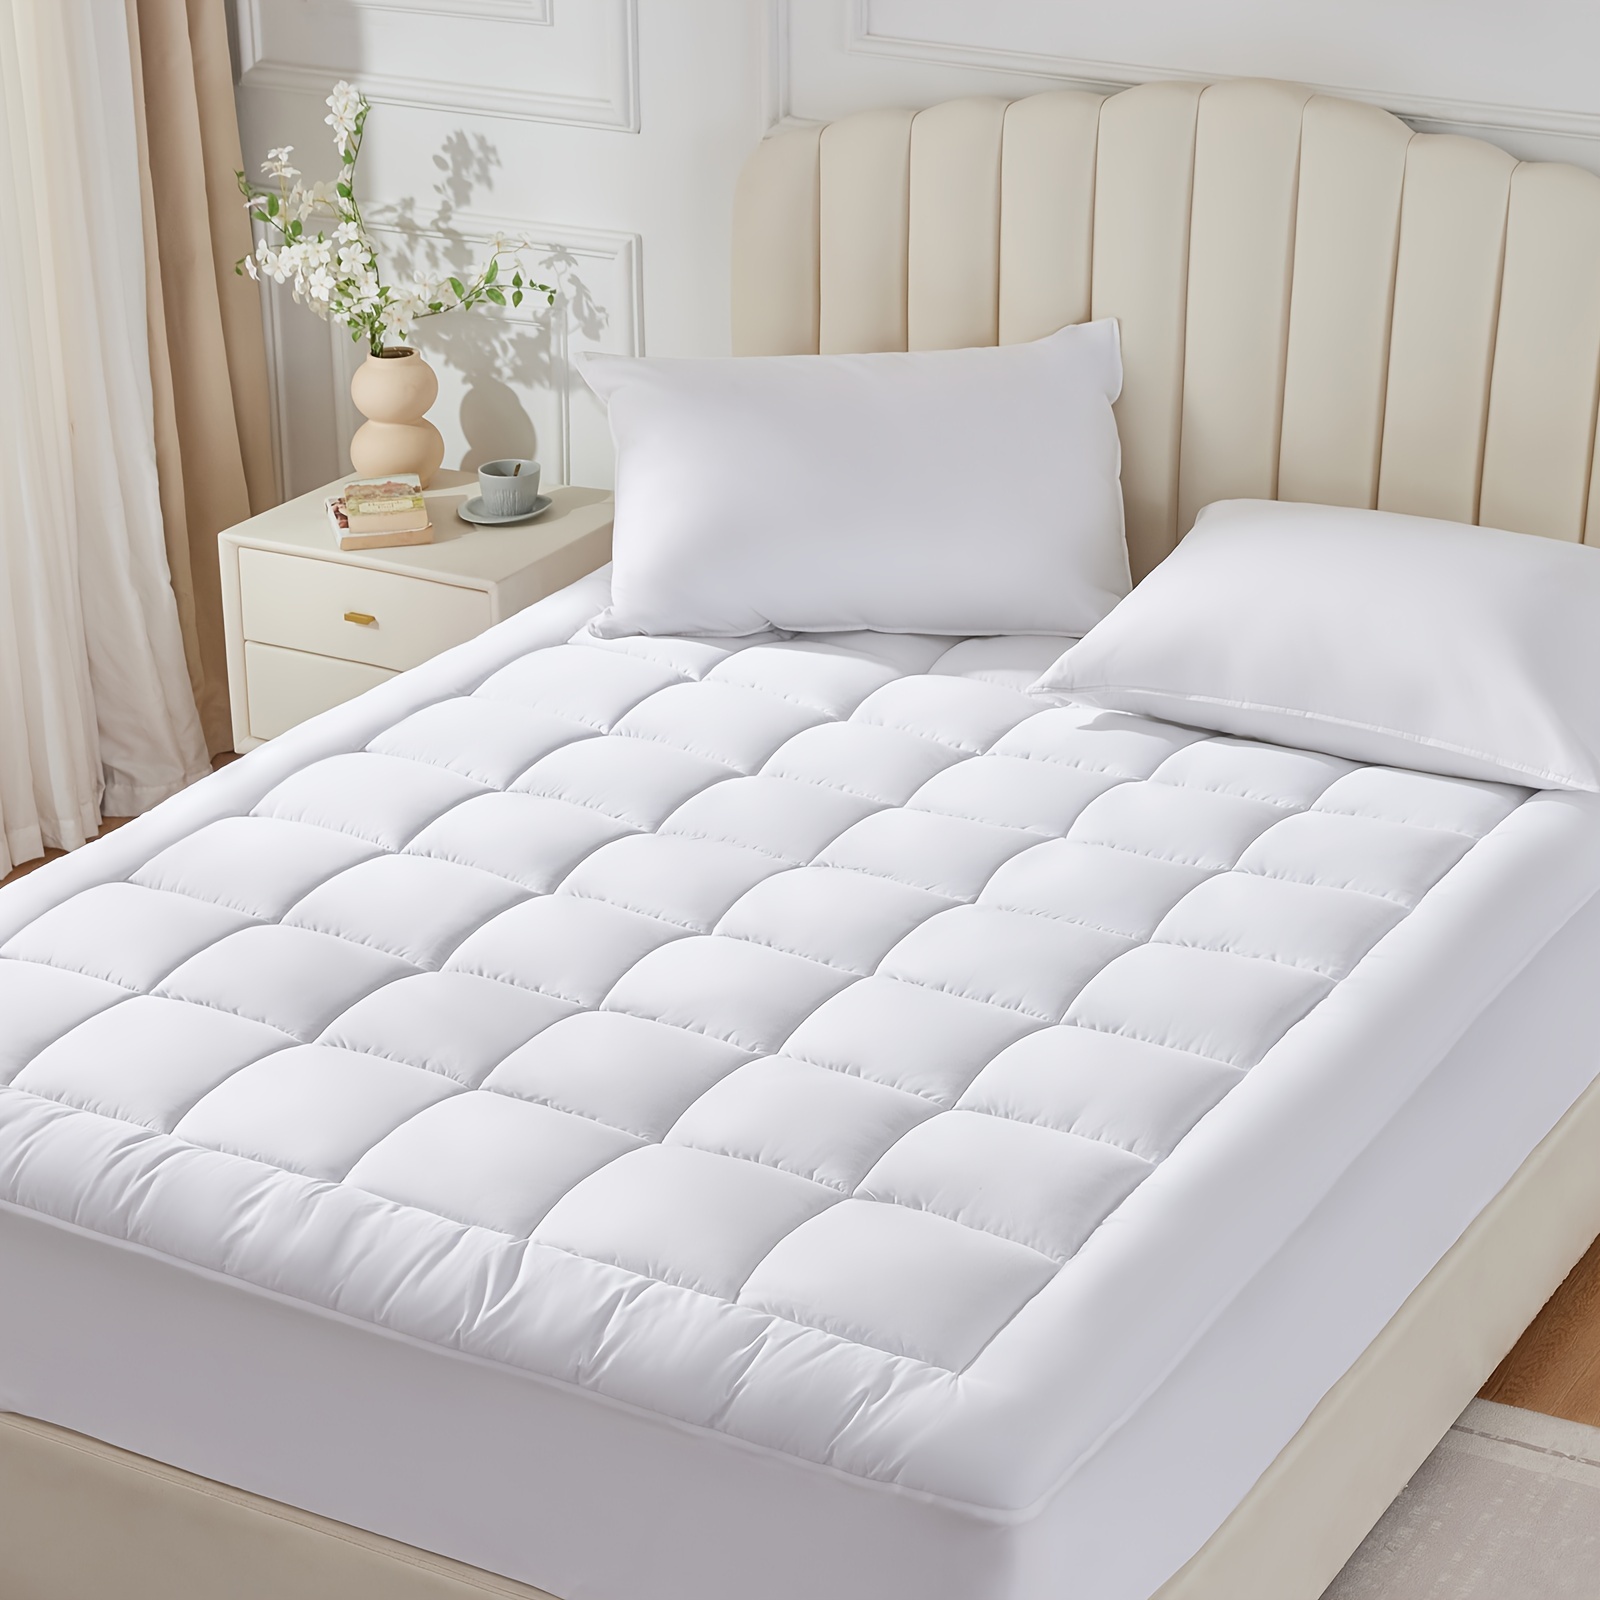 

450gsm Cotton Mattress Pad Mattress Cover Deep Pocket Mattress Topper Non Slip Breathable And Soft Quilted Fitted Mattress Protector Up To 18" Thick Pillowtop